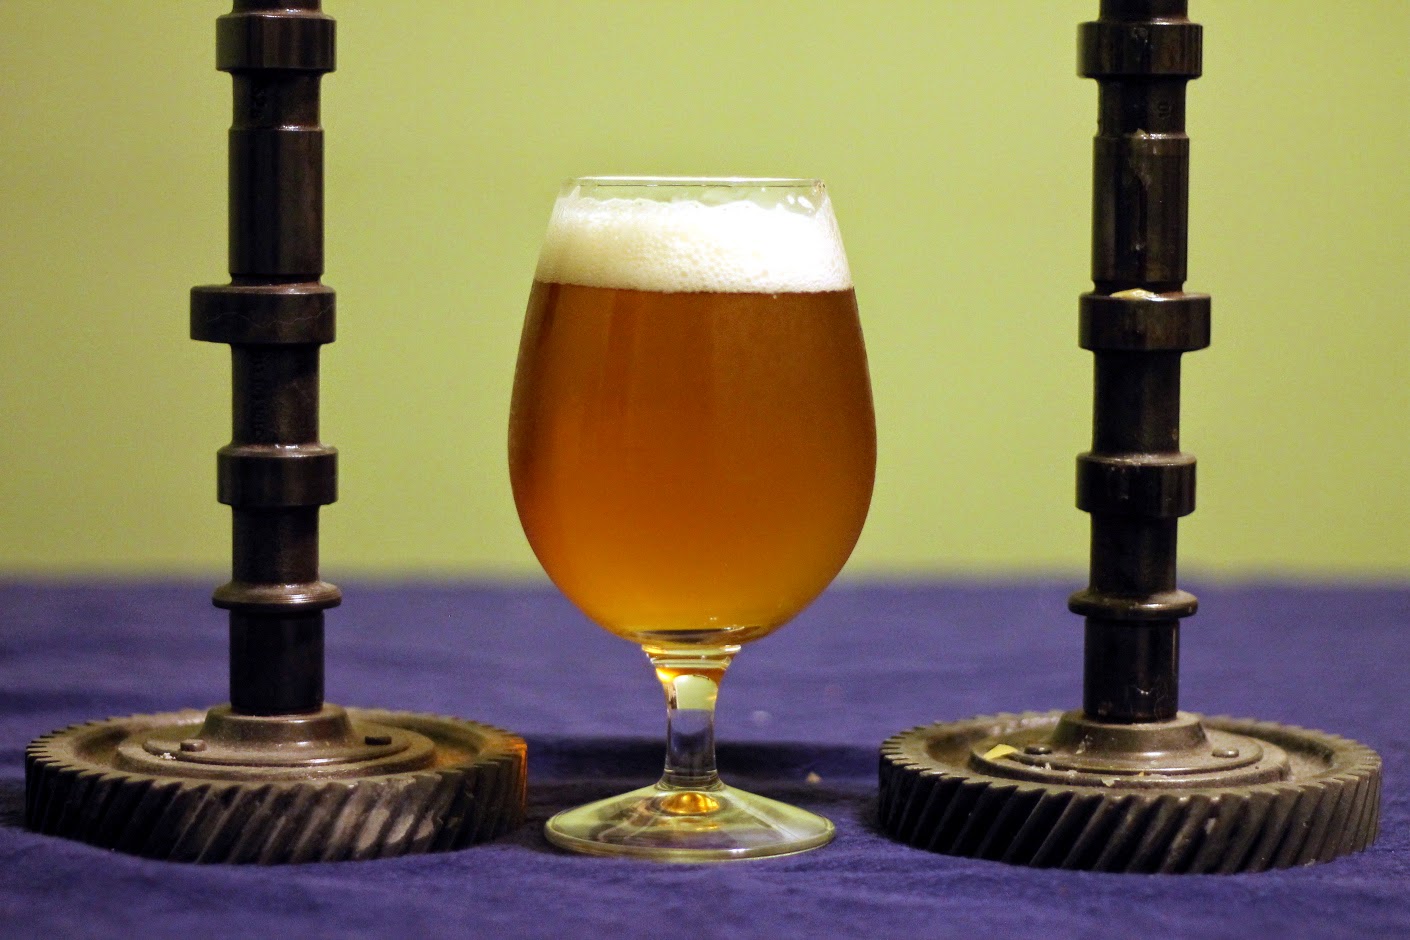 A glass of the finished IPA.